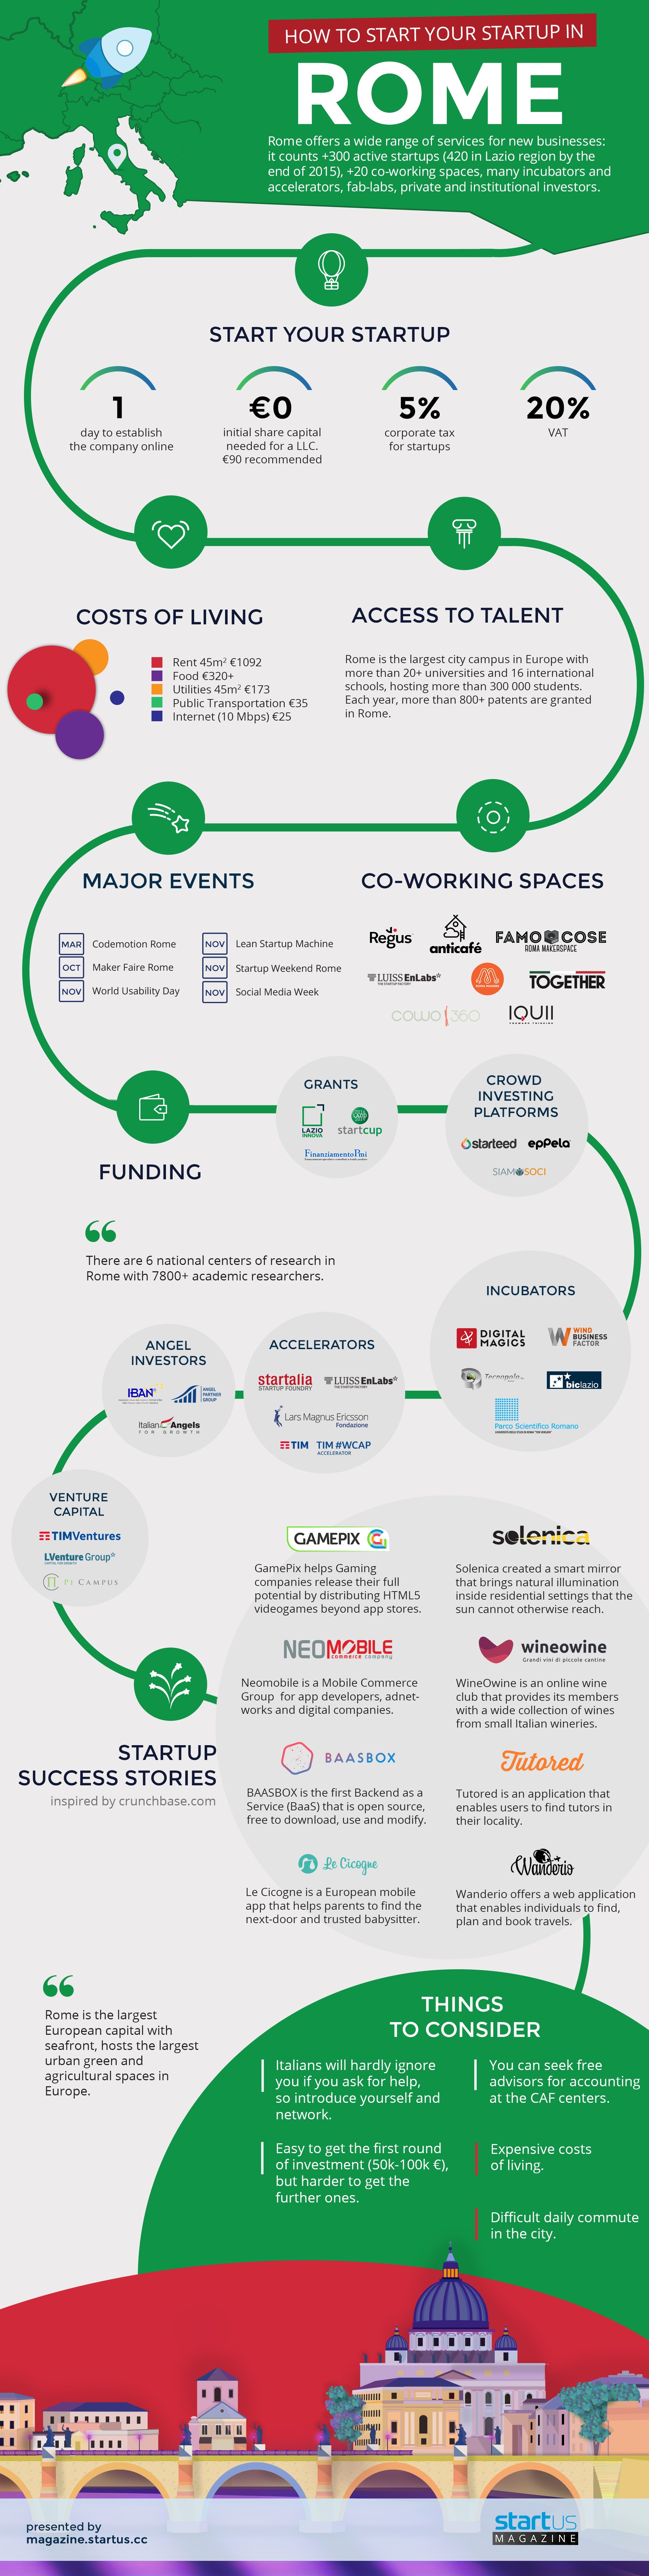 Infographic: How To Start Your Startup In Rome